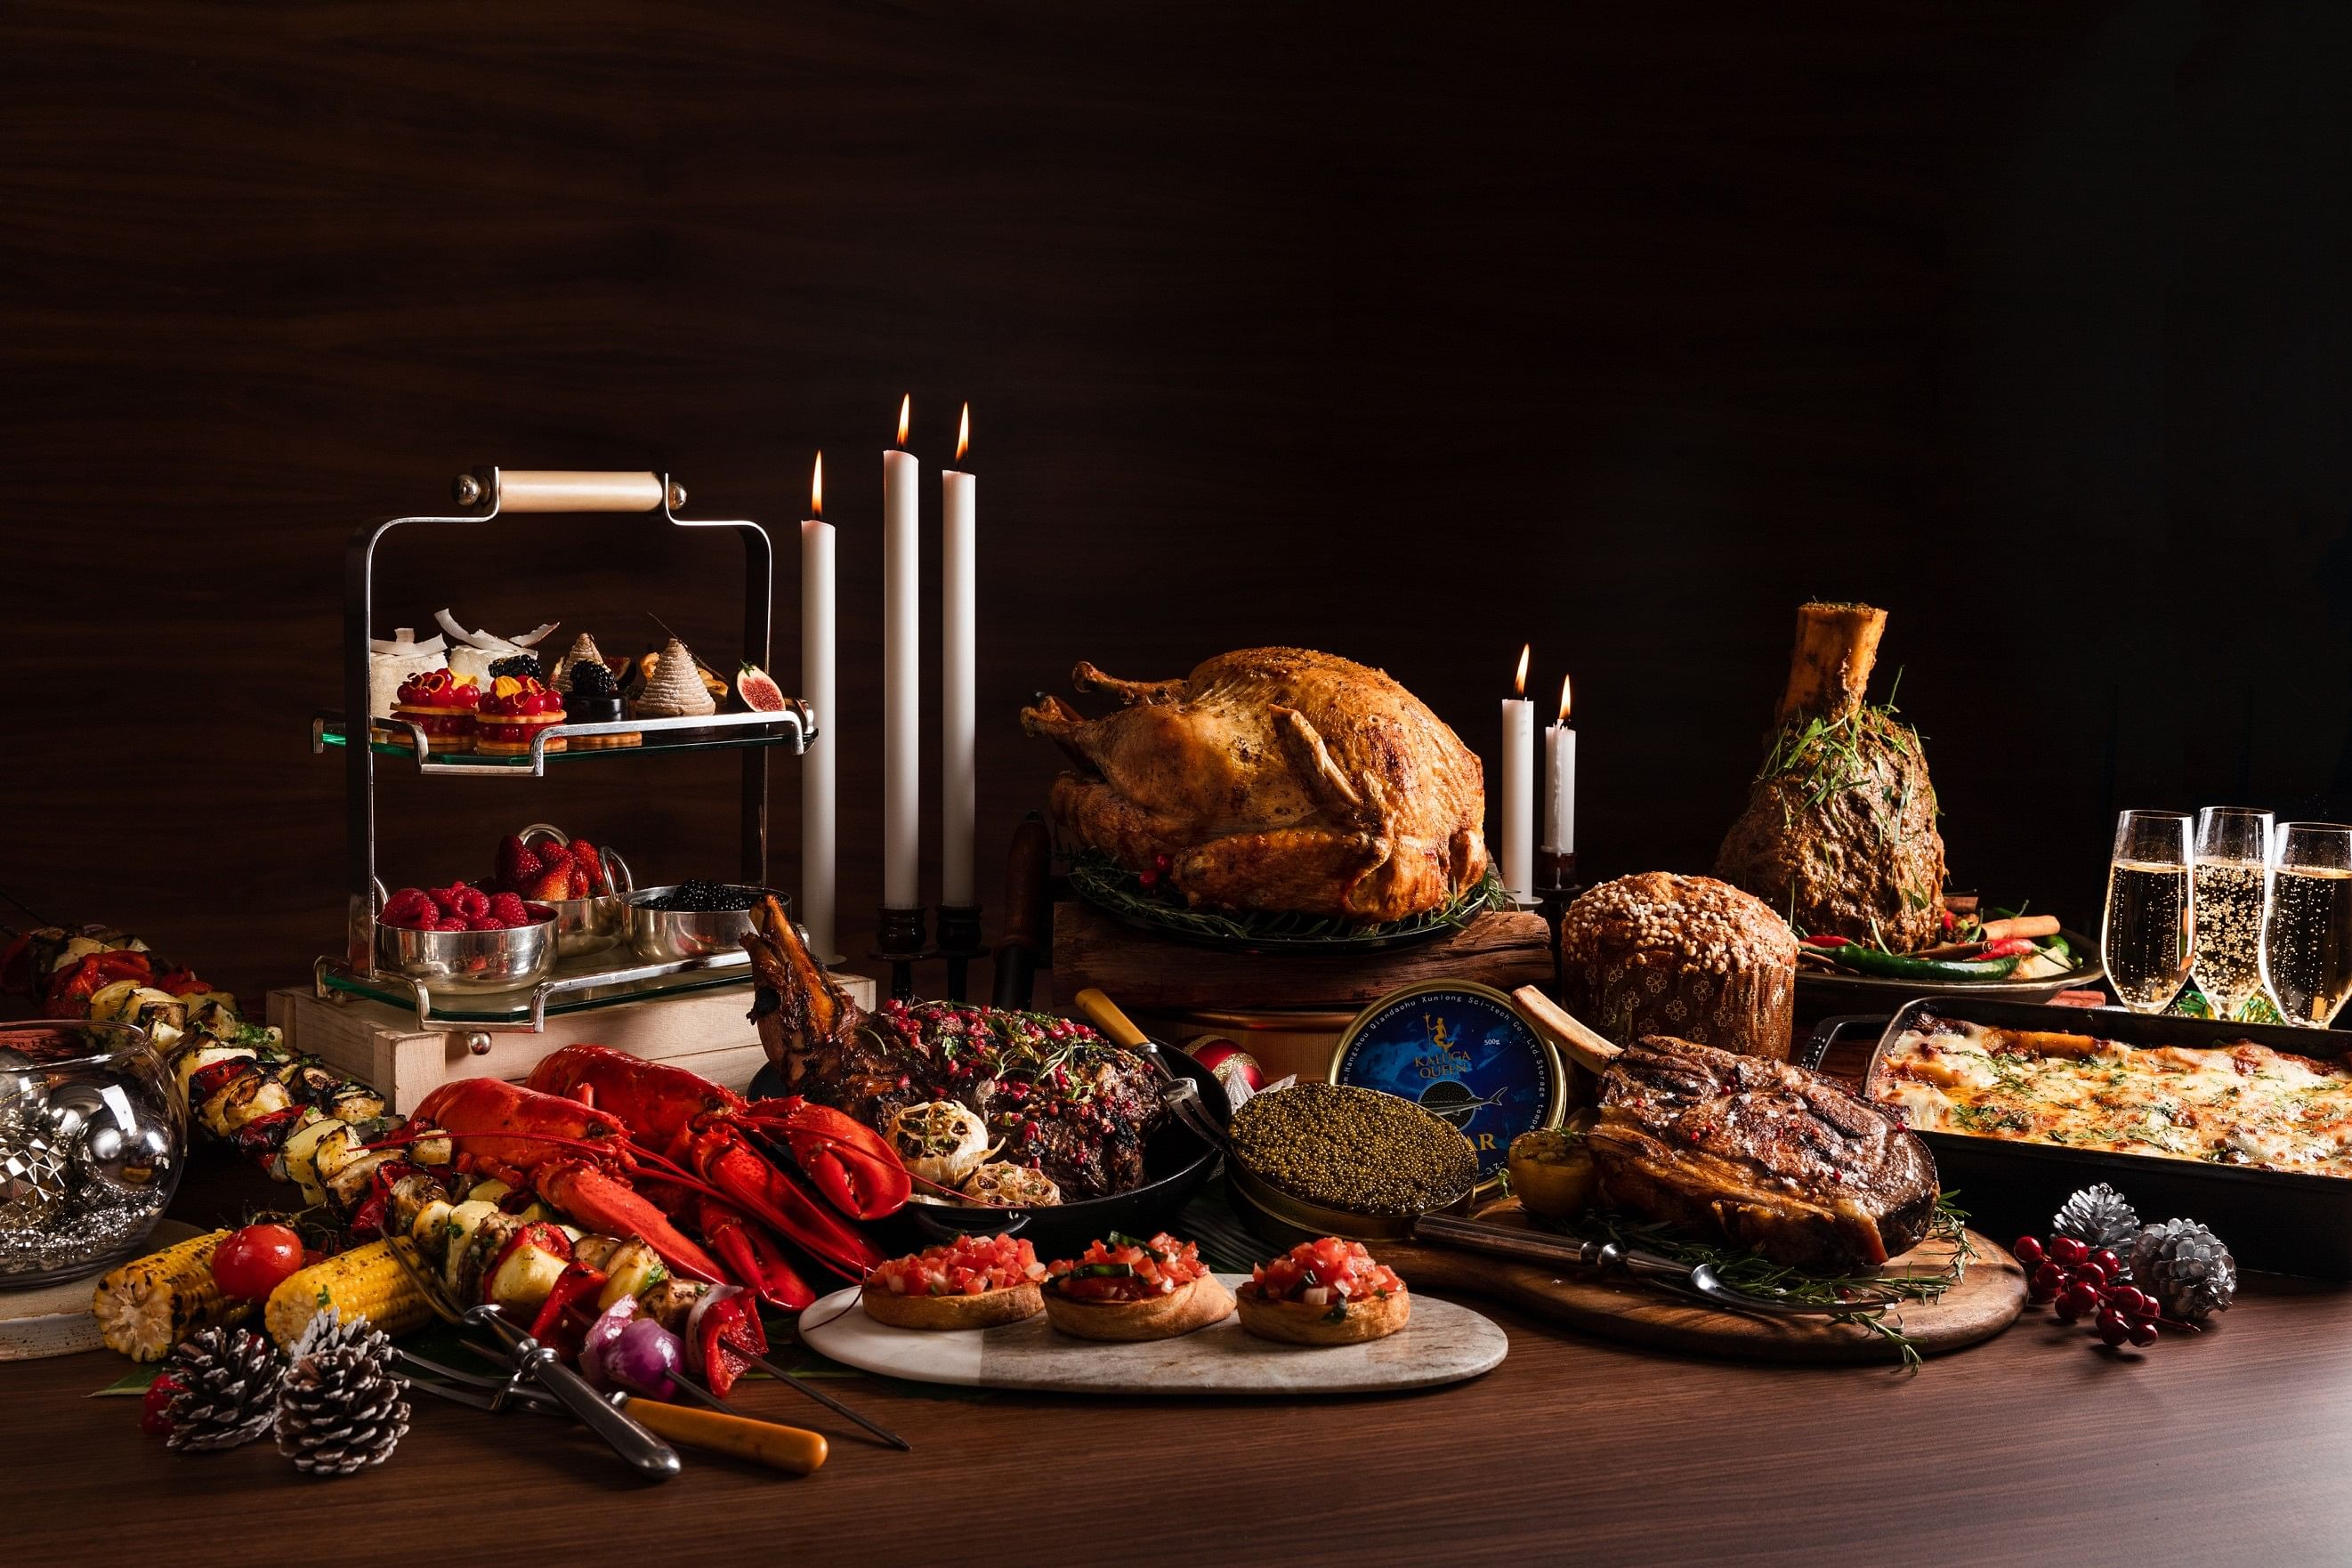 Planning a festive celebration? This hotel has a tonne of buffets for